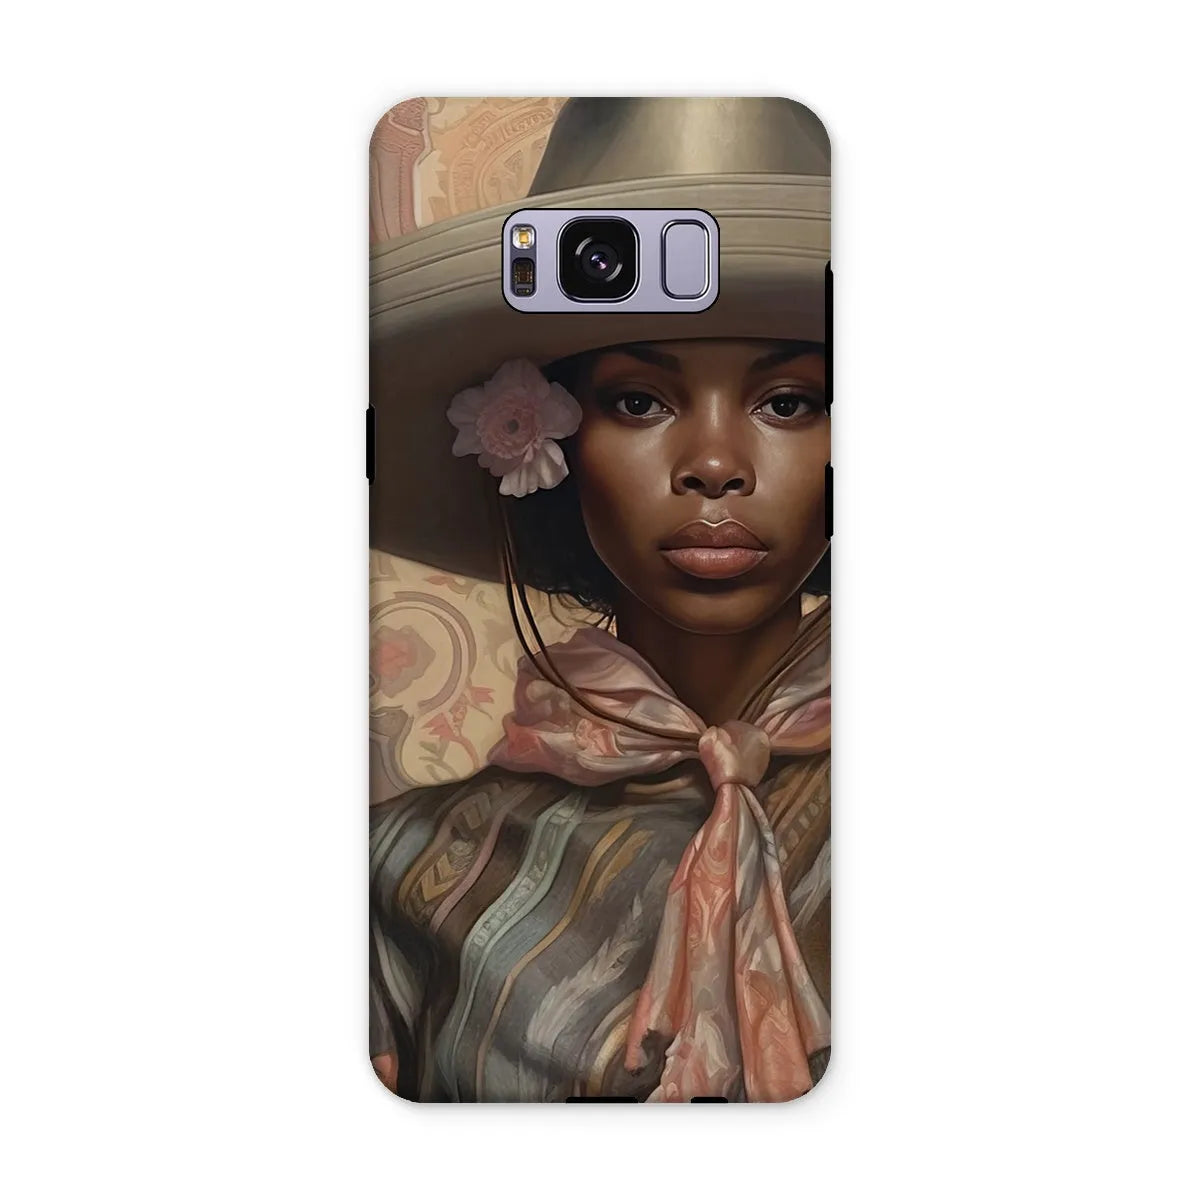 Sadie The Lesbian Cowgirl - Sapphic Art Phone Case - Samsung Galaxy S8 Plus / Matte - Mobile Phone Cases - Aesthetic Art